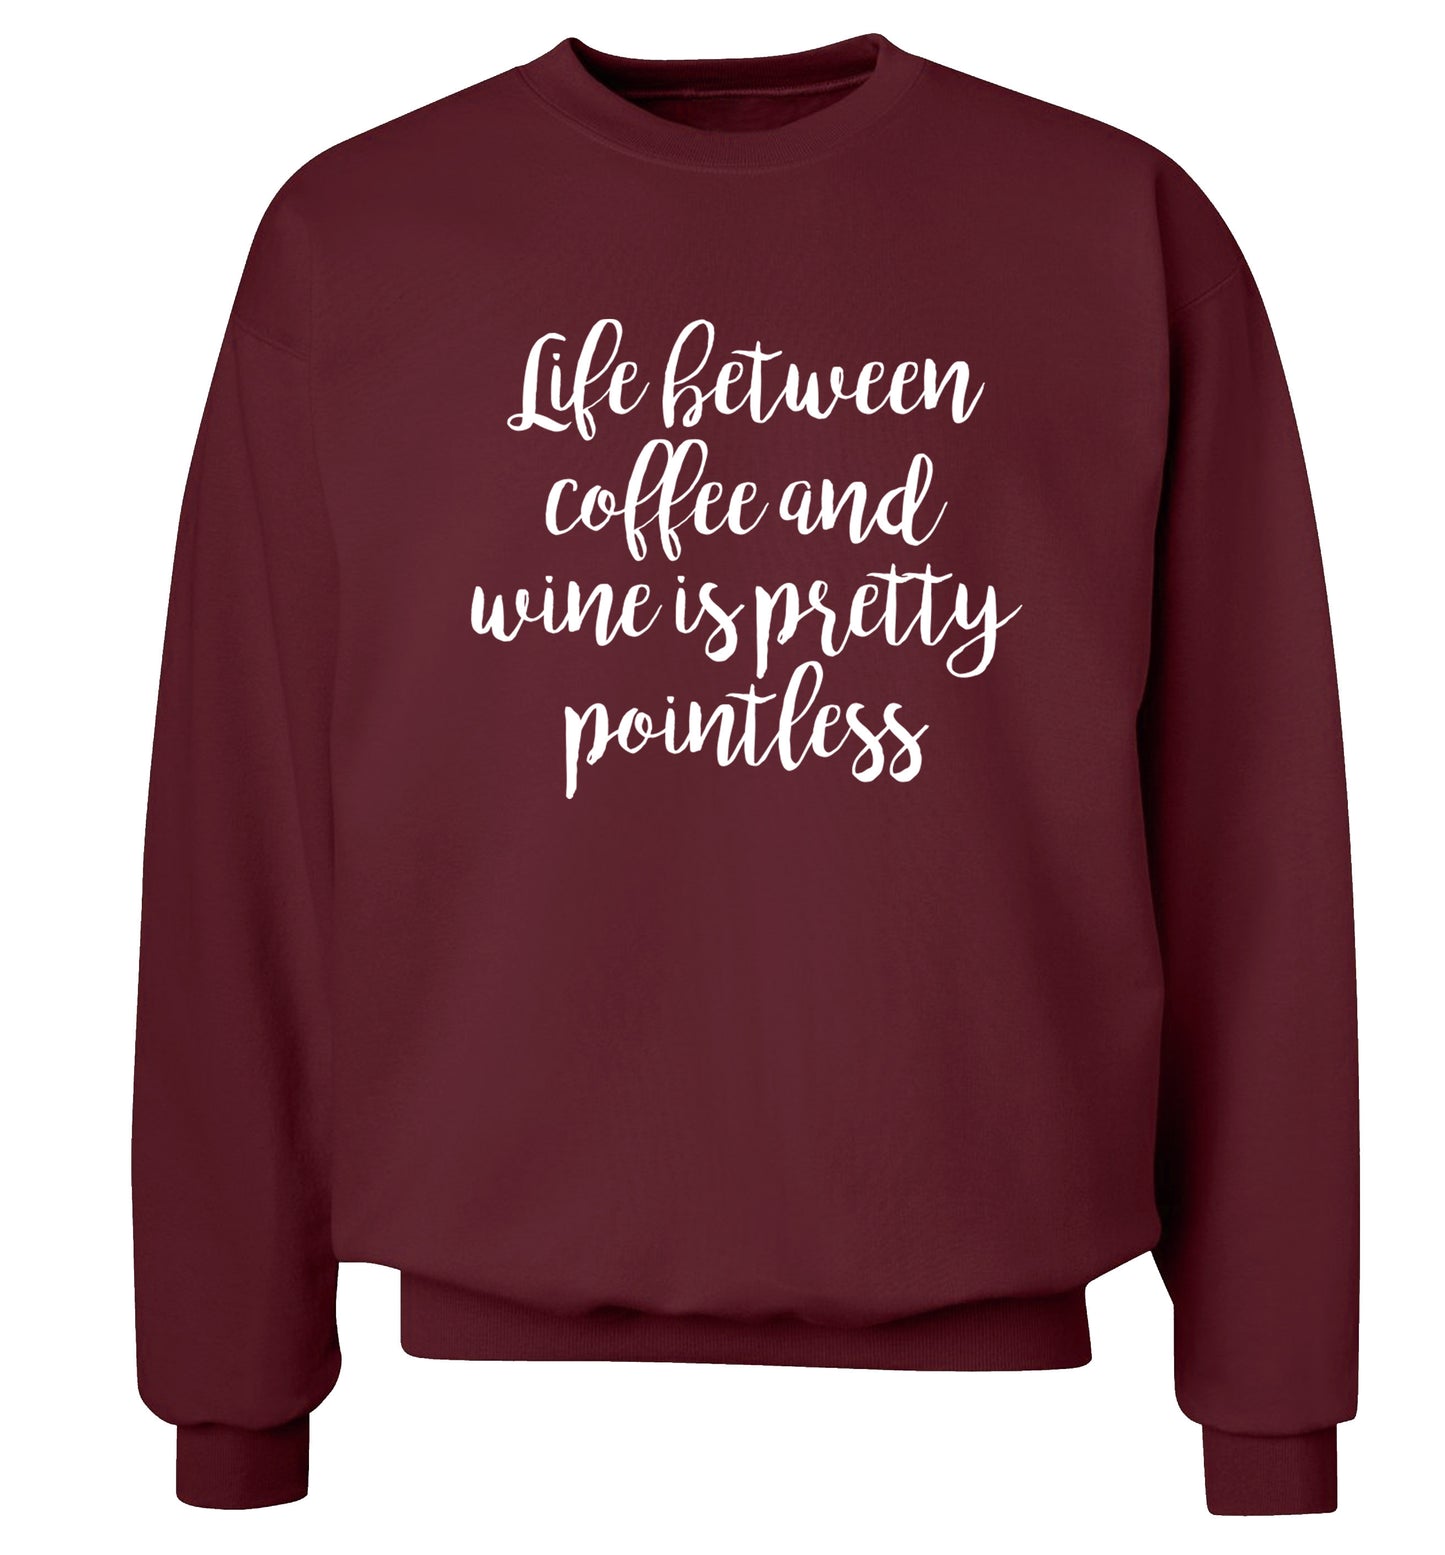 Life between coffee and wine is pretty pointless Adult's unisex maroon Sweater 2XL